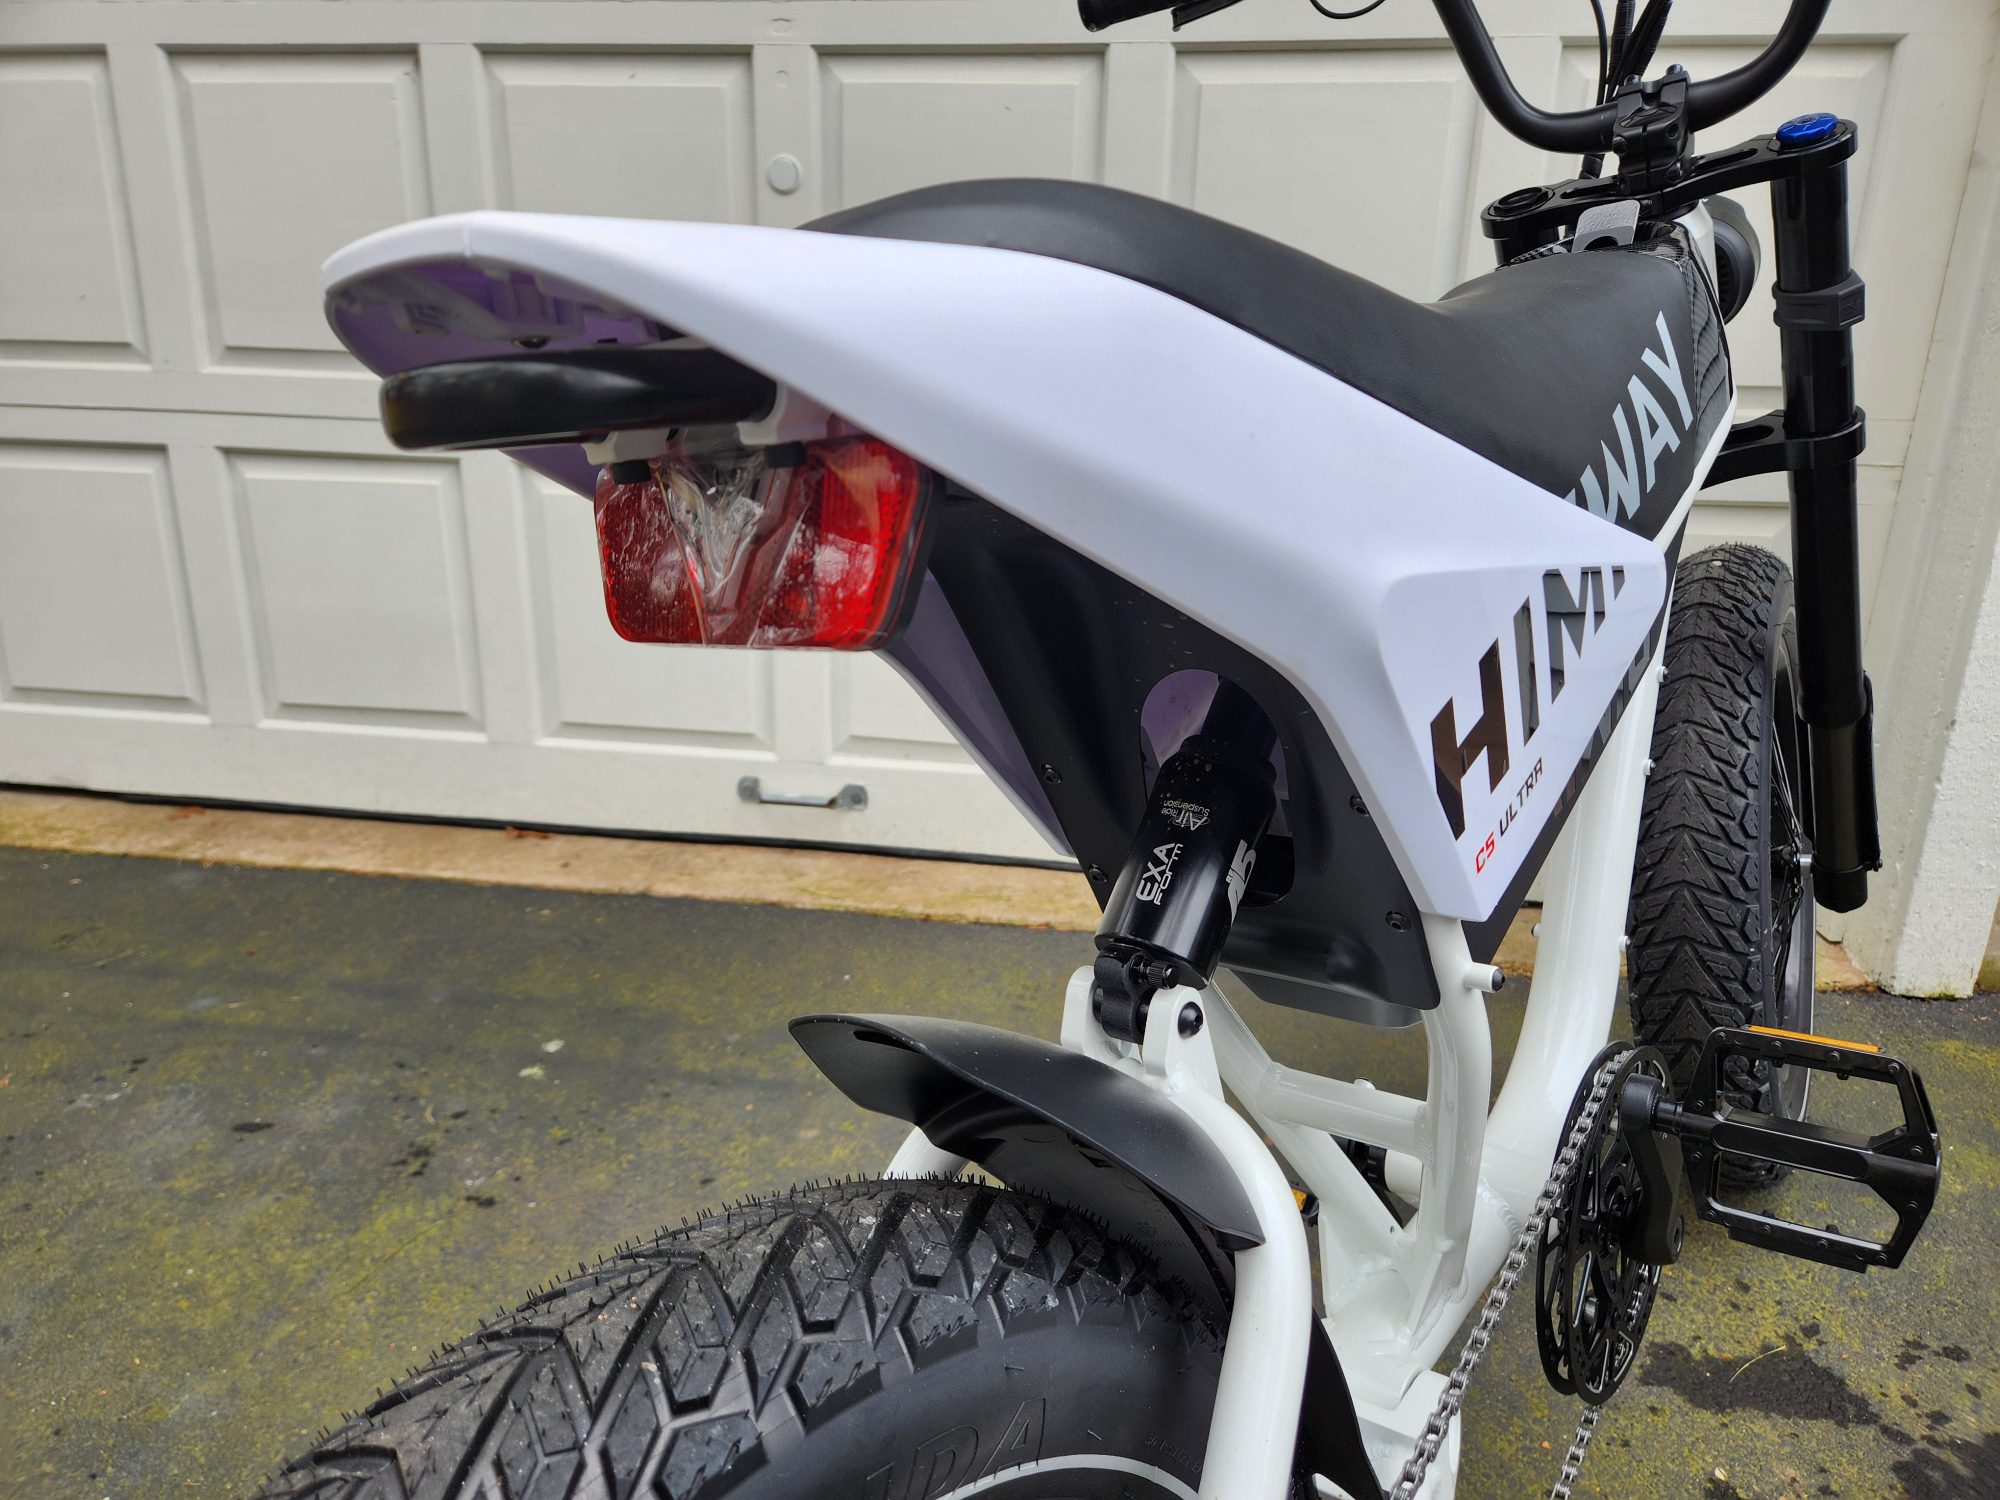 Close-up view of the Himiway C5 e-bike Exa Form AT-RE air shock rear suspension.